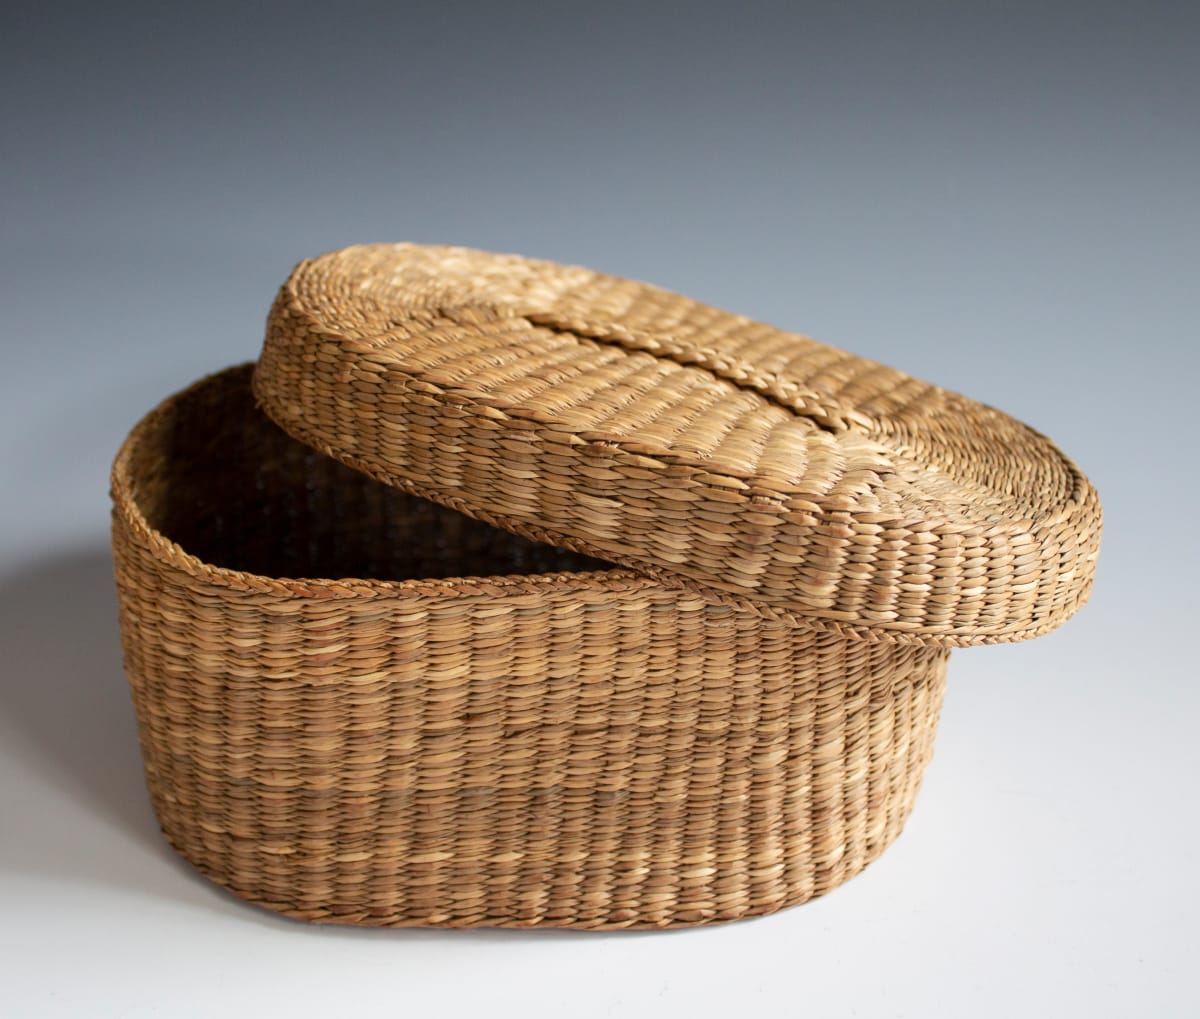 Sweetgrass Basket by Unknown, Iroquois Indian 